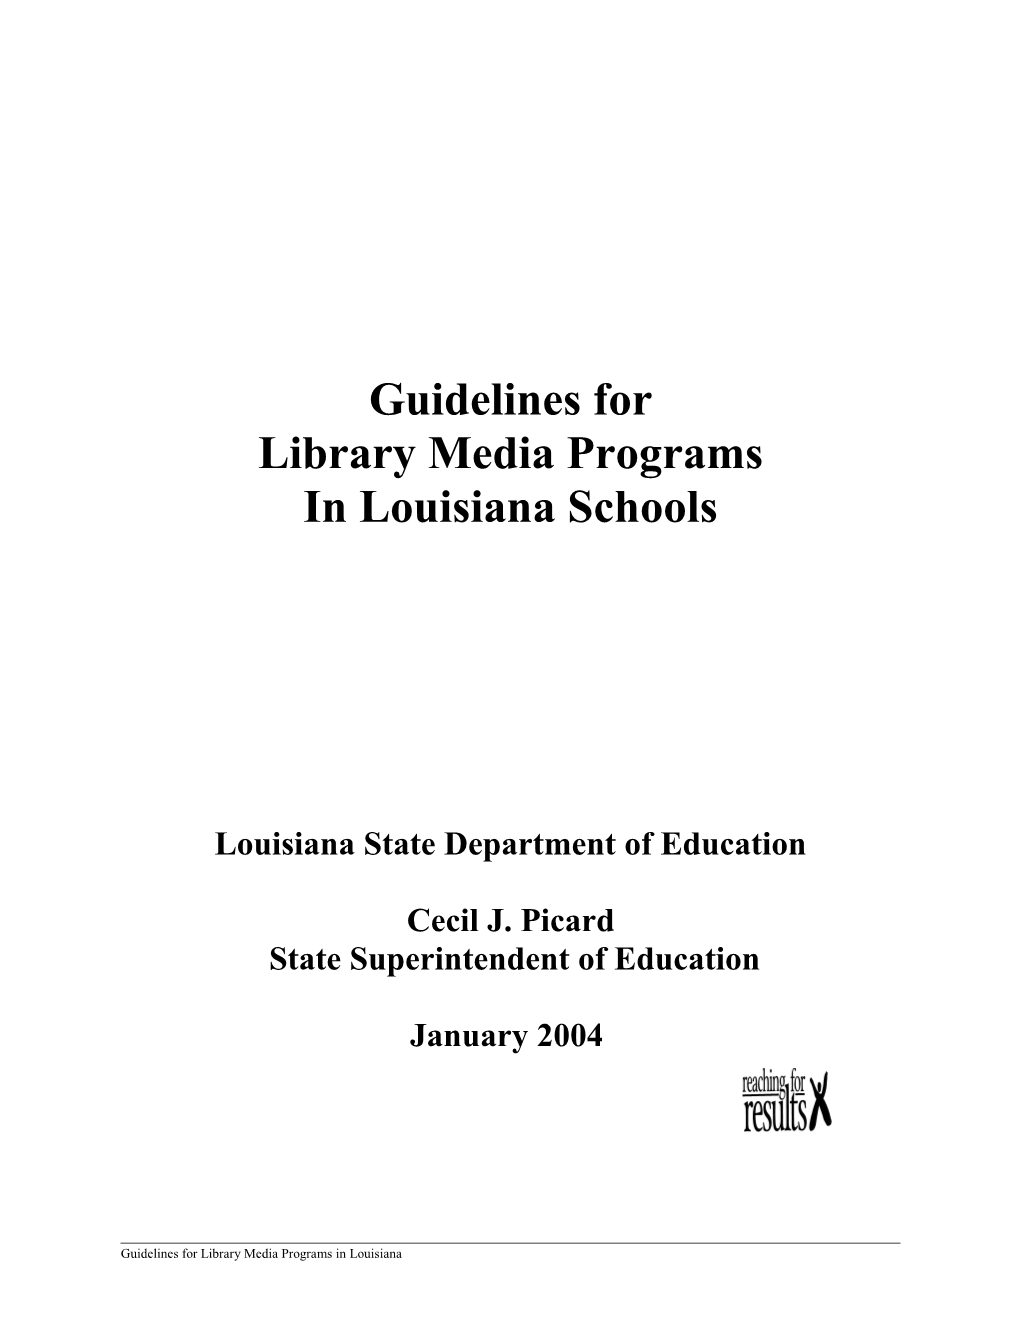 Louisiana State Department of Education